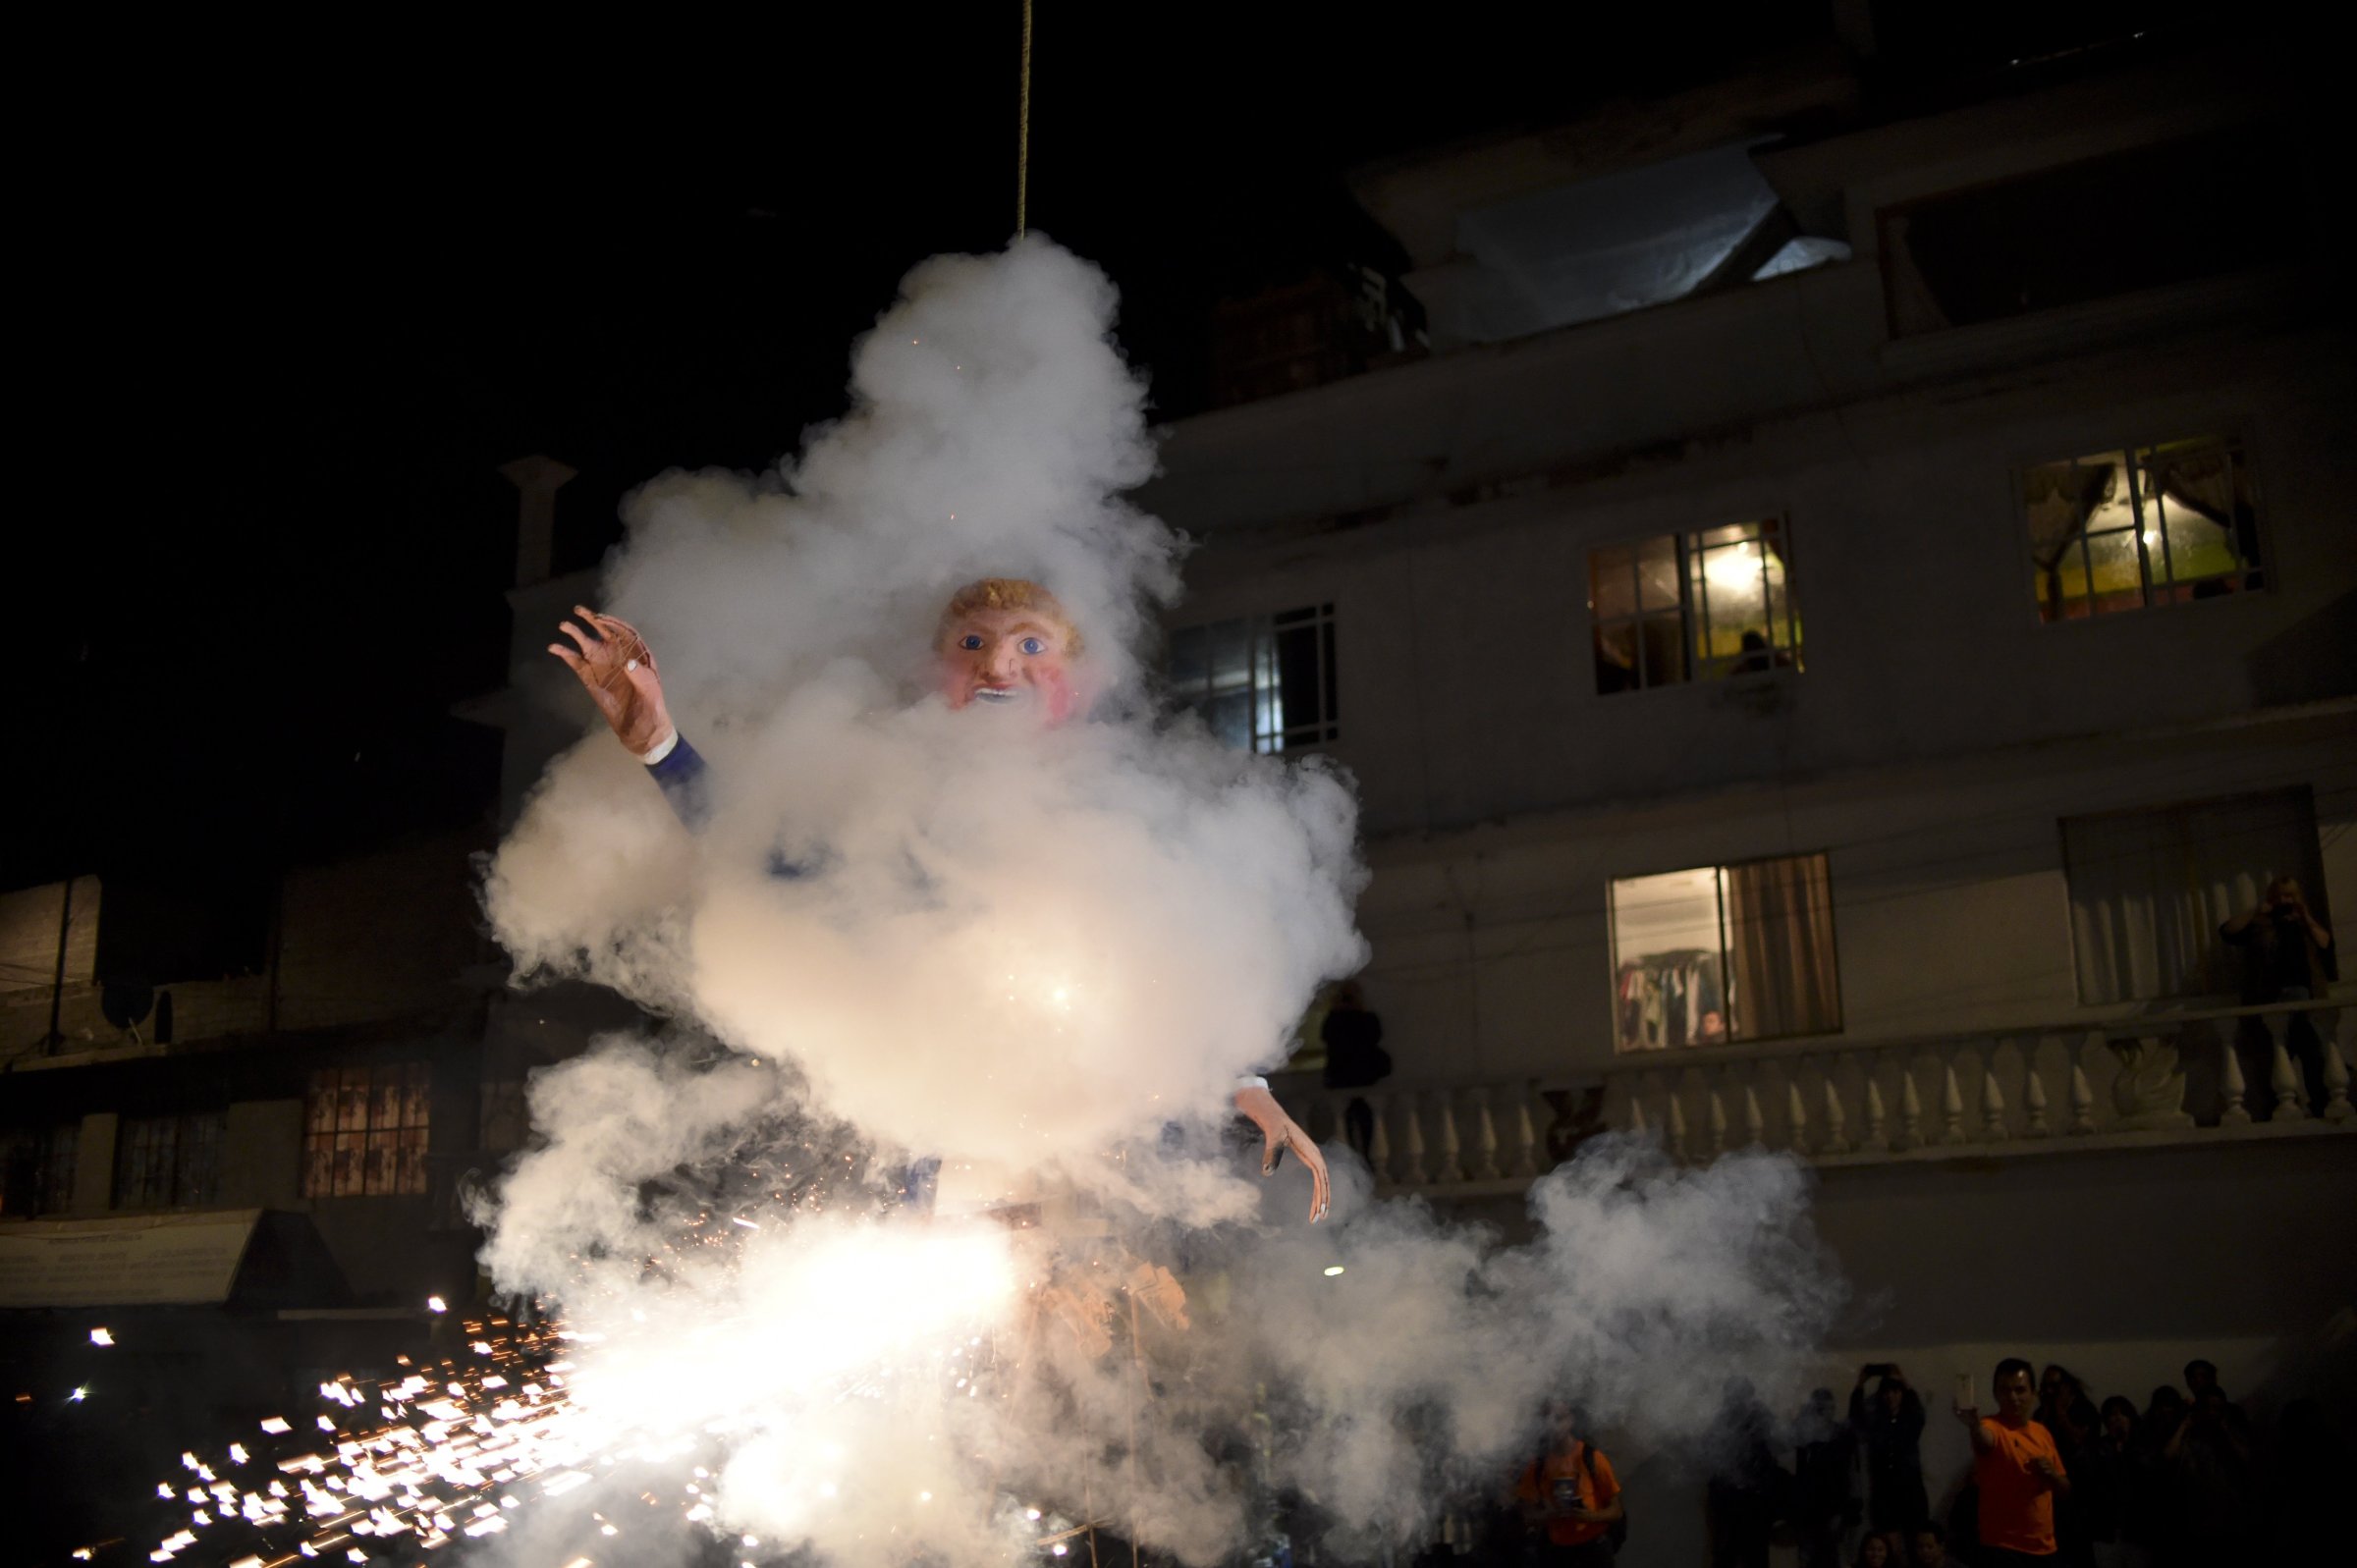 Mexicans set fire to an effigy of Donald Trump in Mexico City on March 26, 2016.